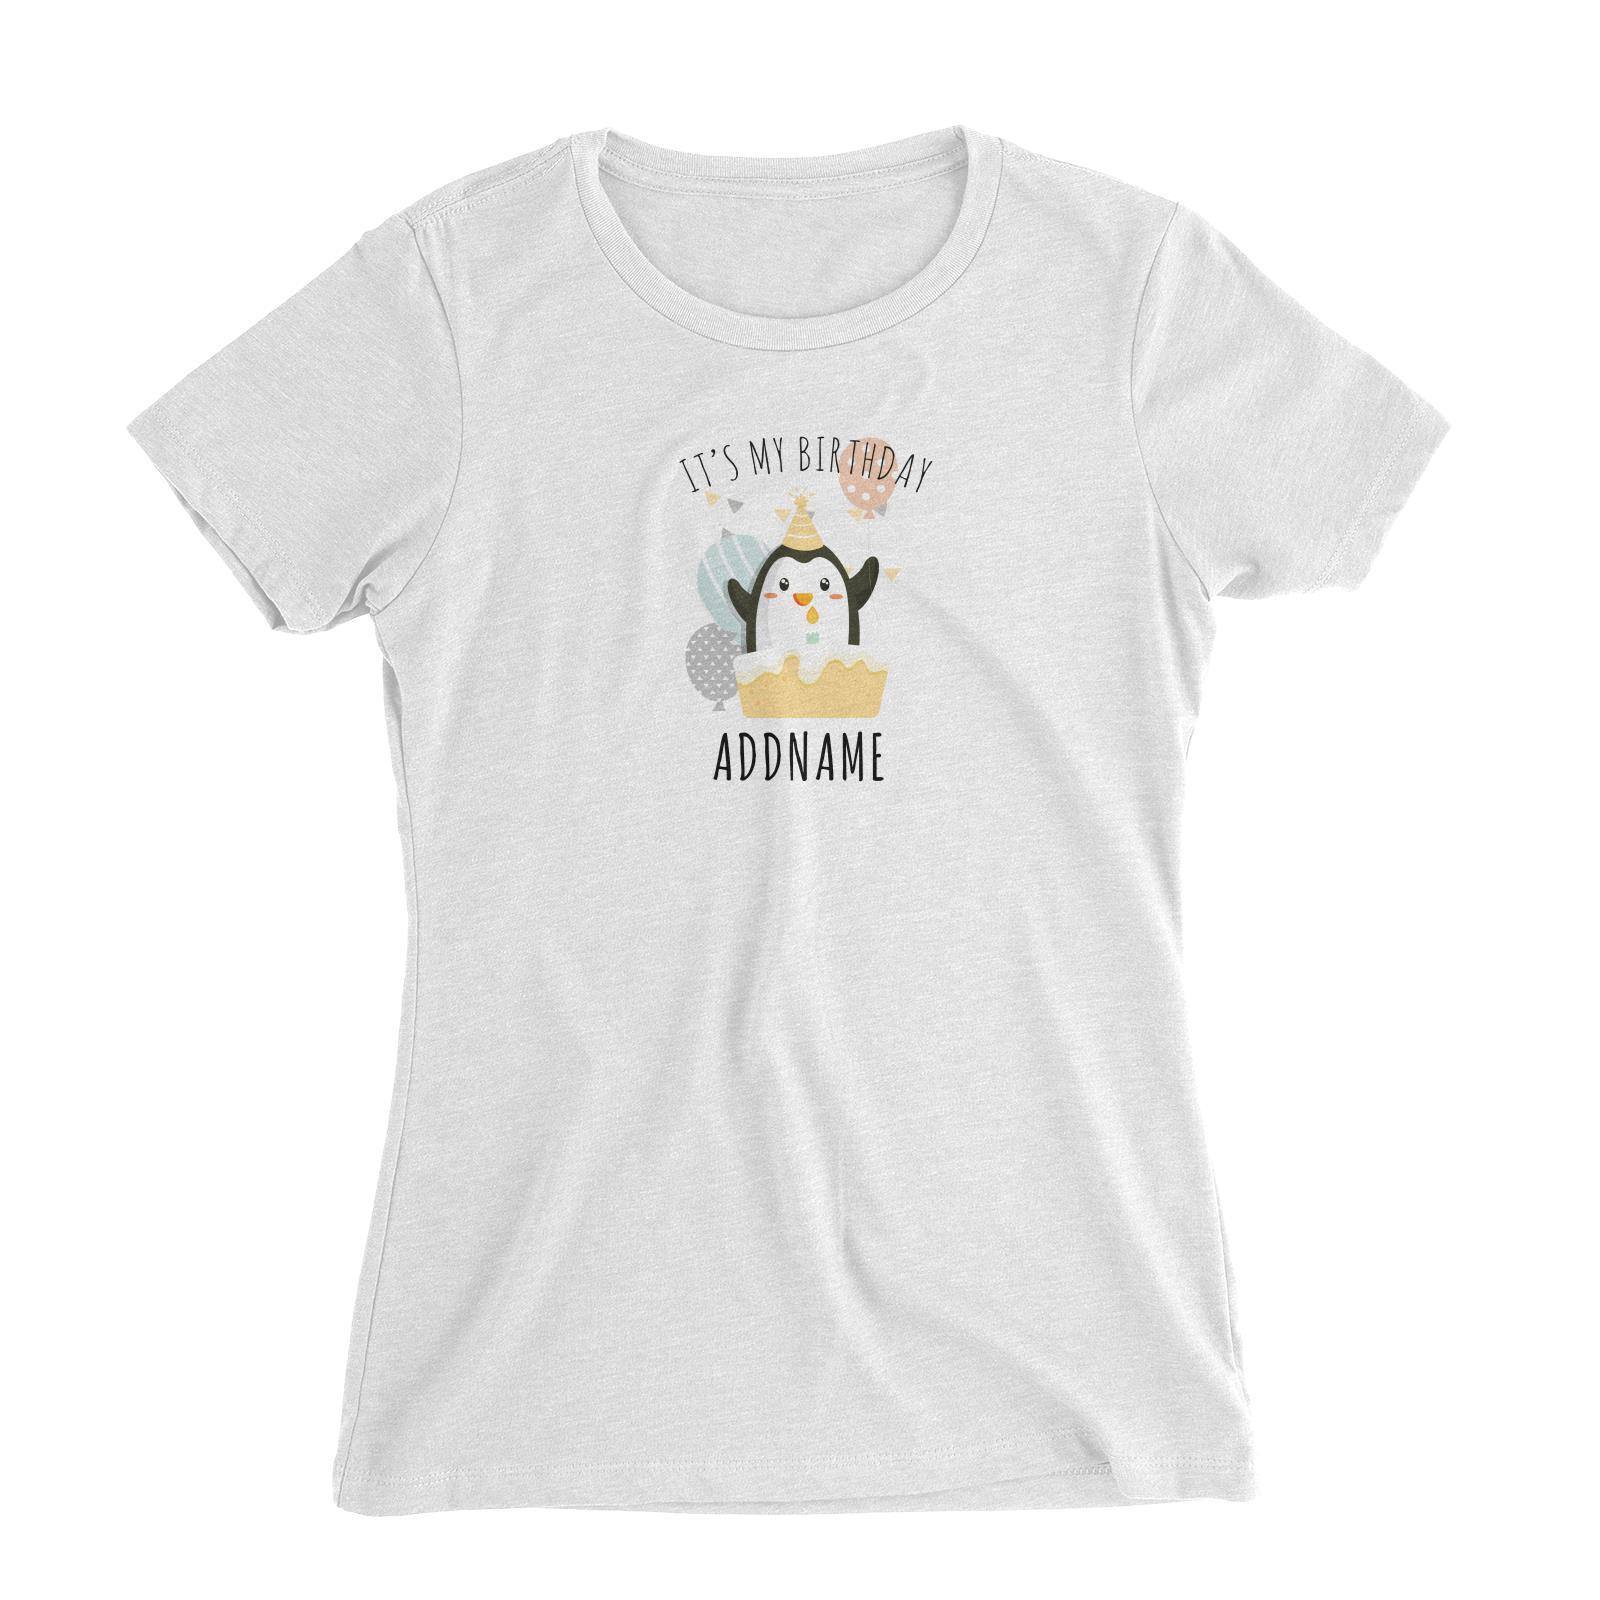 Birthday Cute Penguin And Cake It's My Birthday Addname Women's Slim Fit T-Shirt